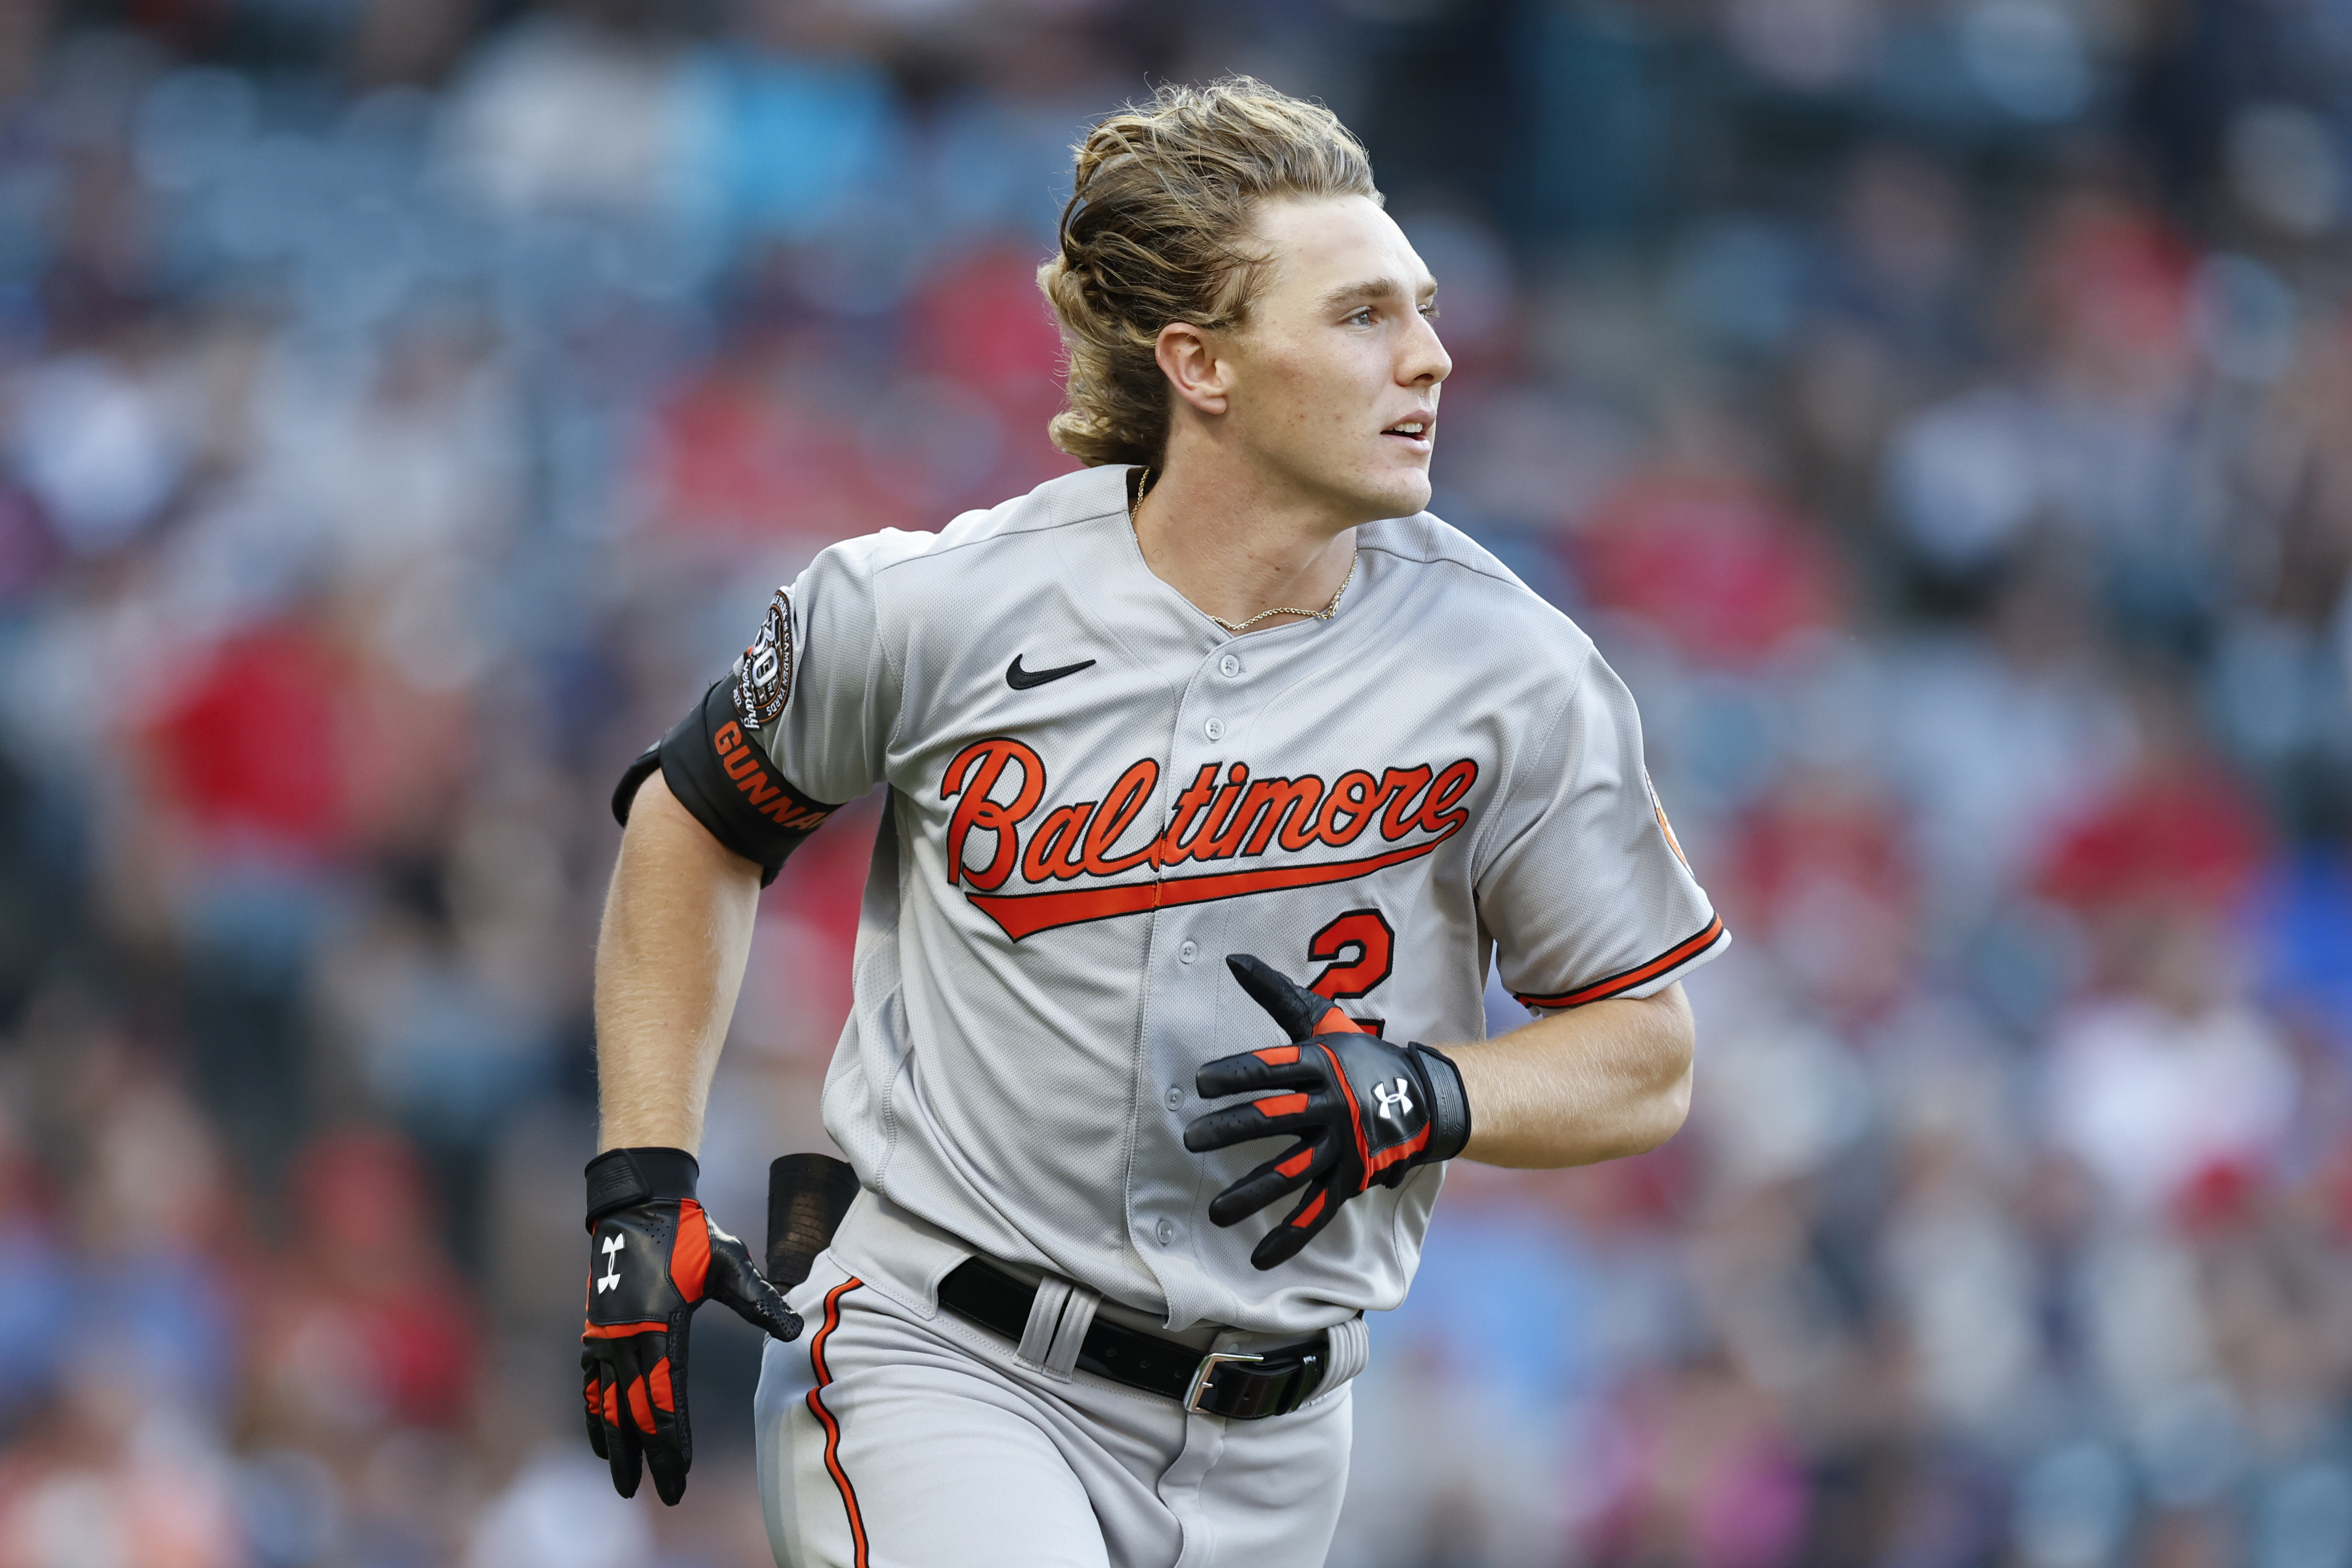 Best Orioles players by uniform number